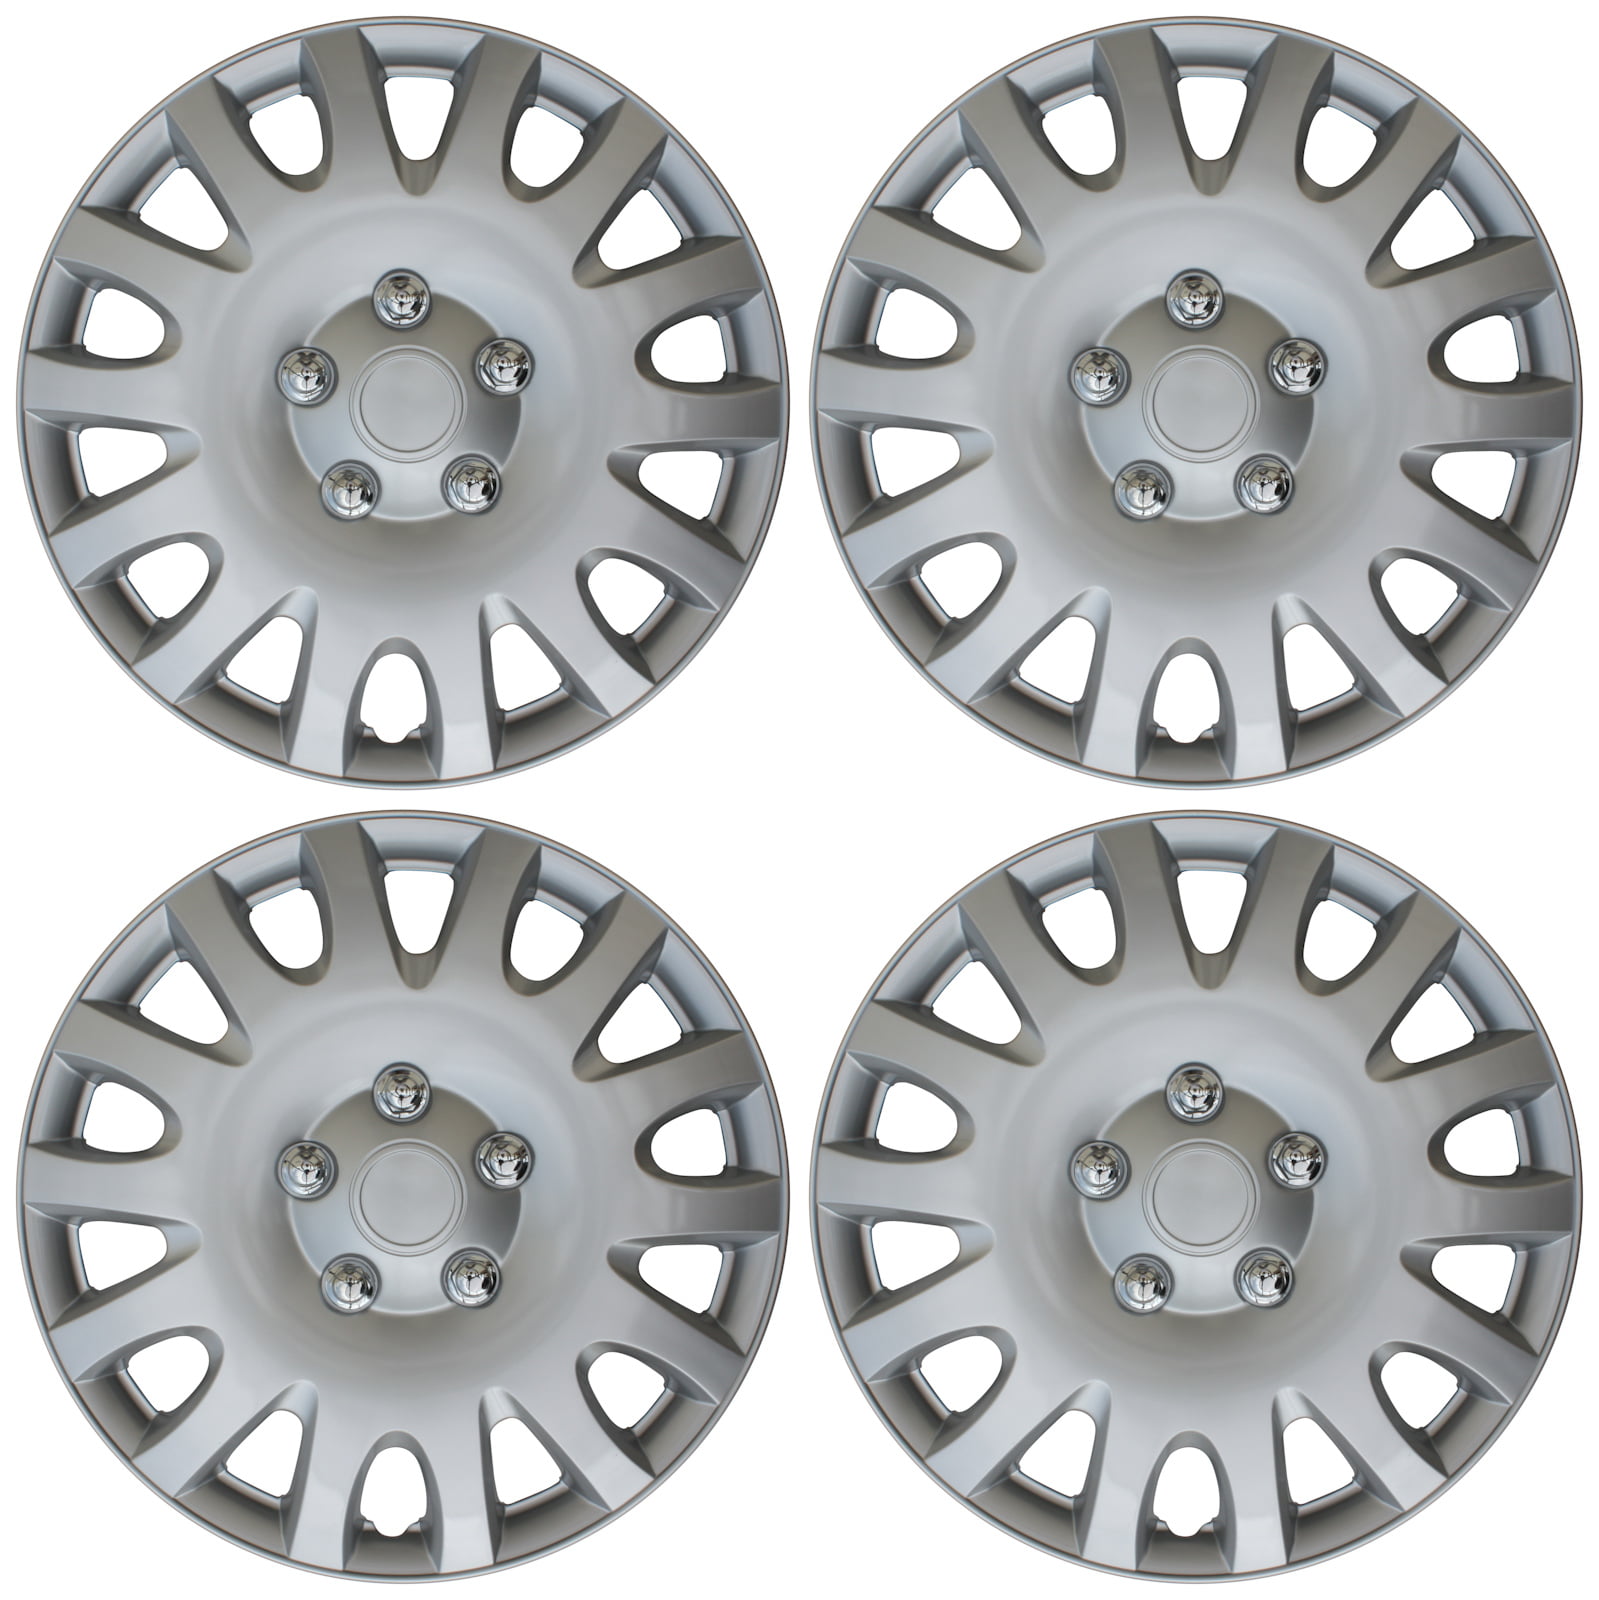 4 Piece Set SILVER LACQUER Hub Caps Fits 15" Inch Steel Wheels Wheel Cover Cap 